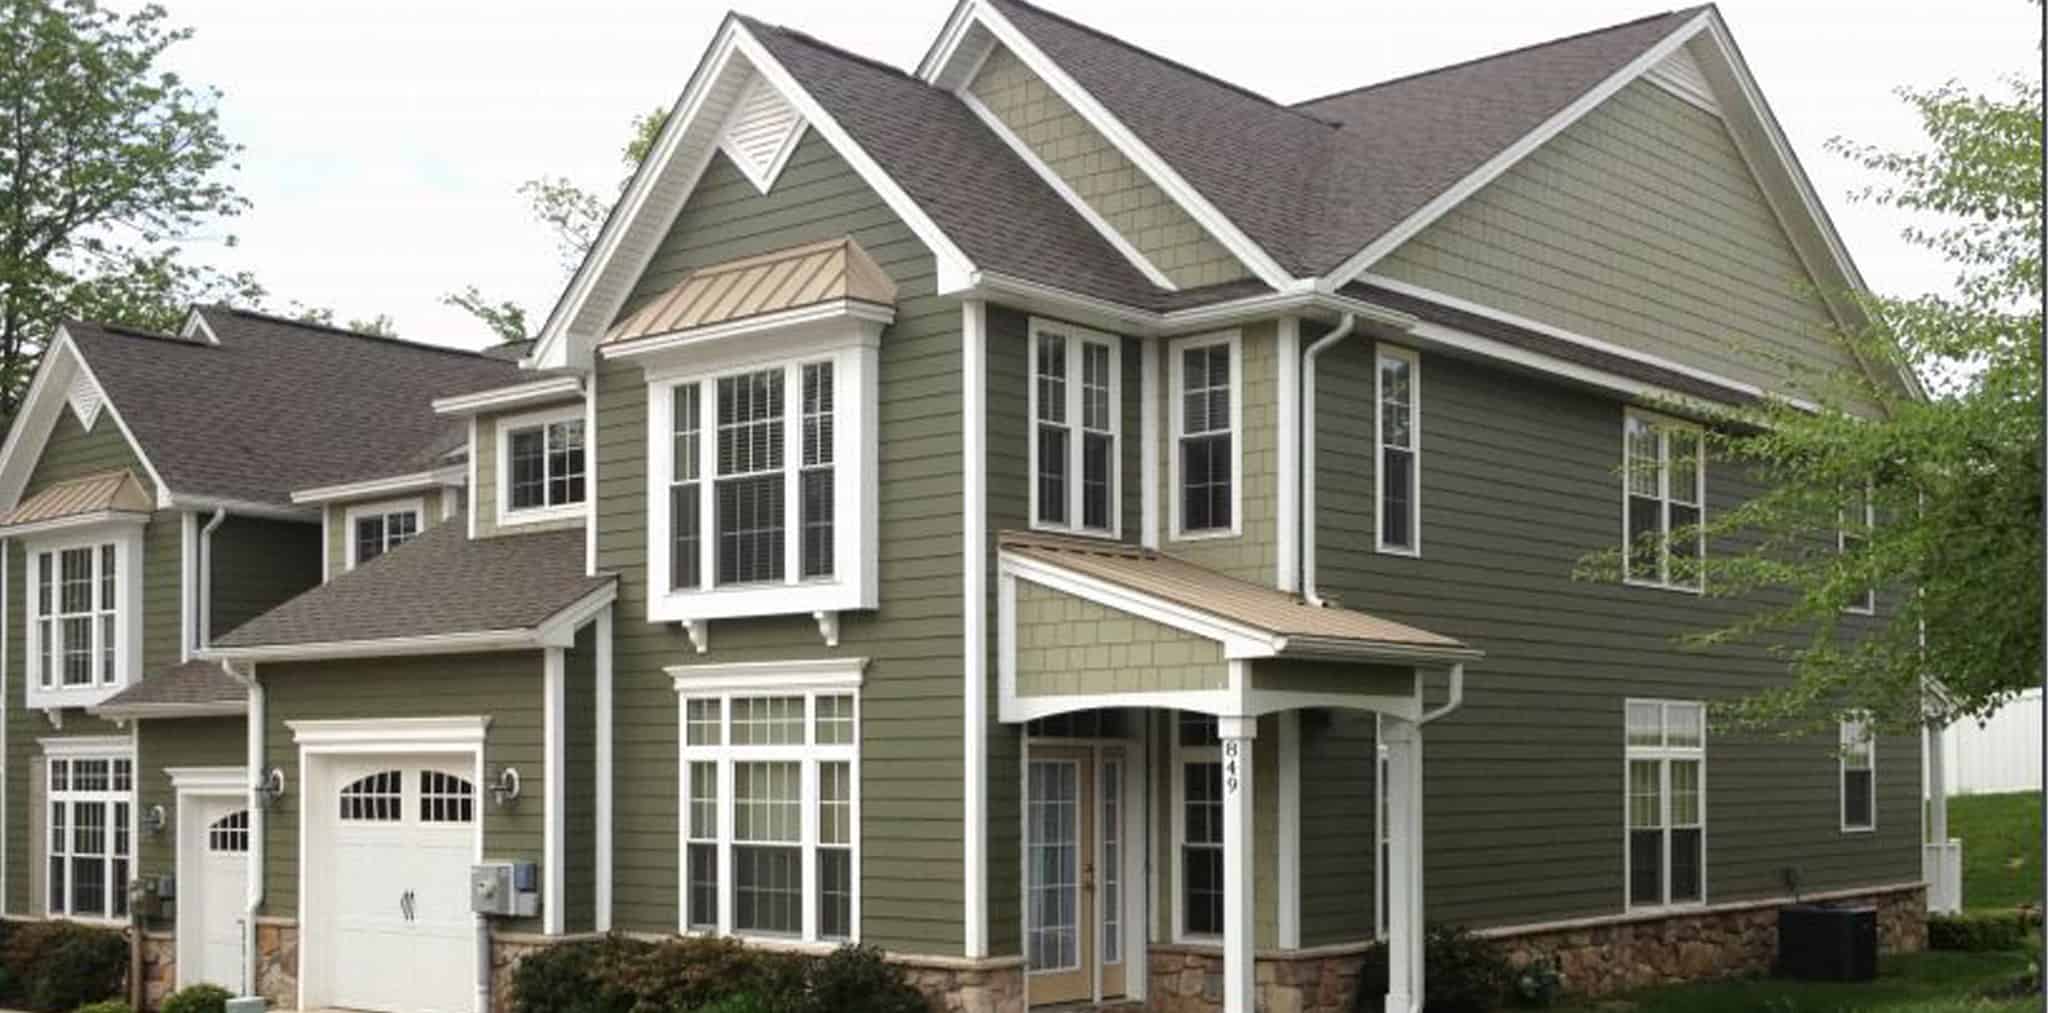 Artisan Siding. The Aspyre Collection by James Hardie. Installed in and around Columbia South Carolina.